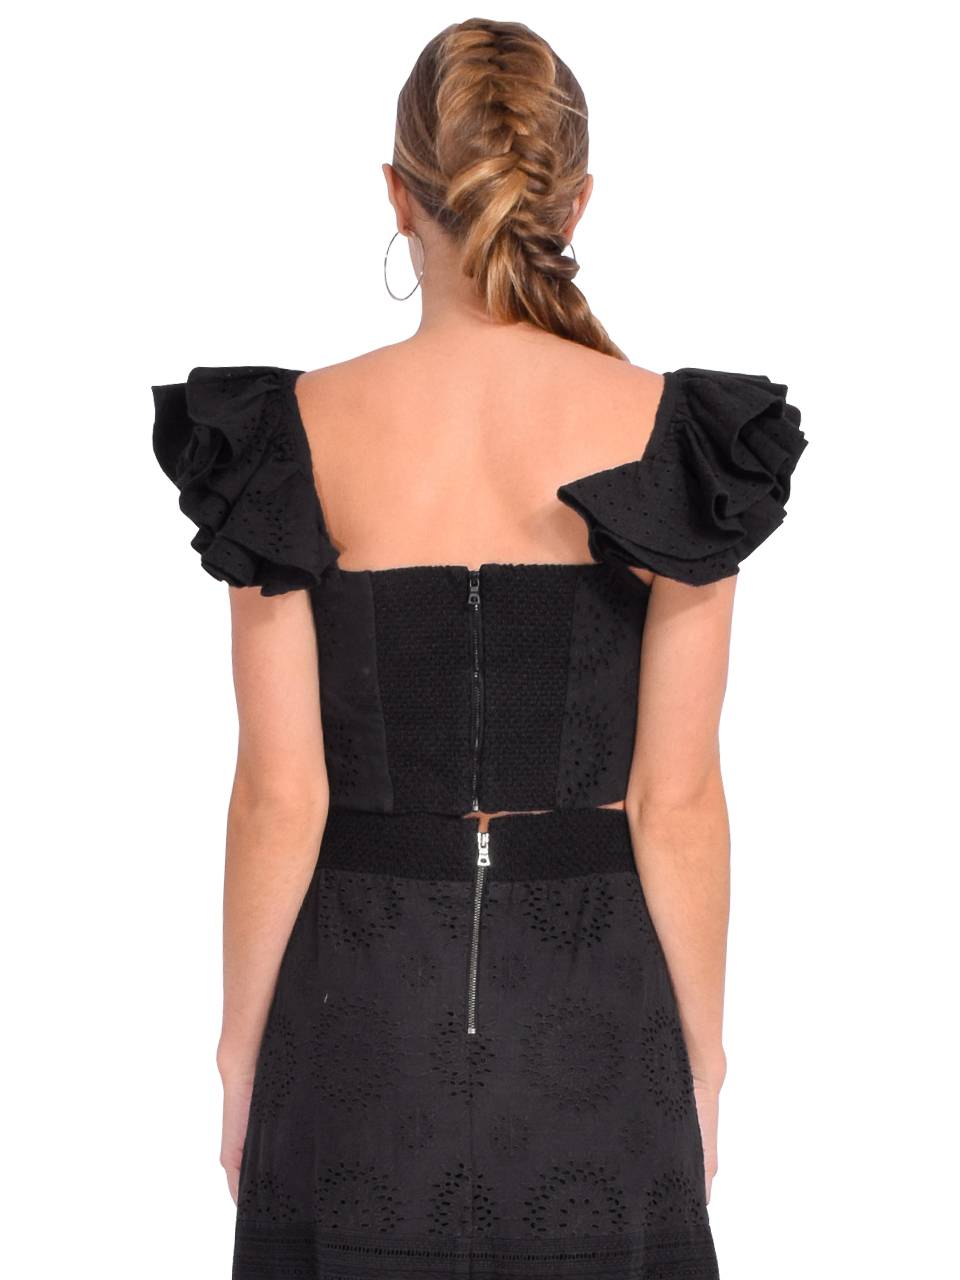 Alice + Olivia Tawny Square Neck Ruffle Crop Top in Black Back View 